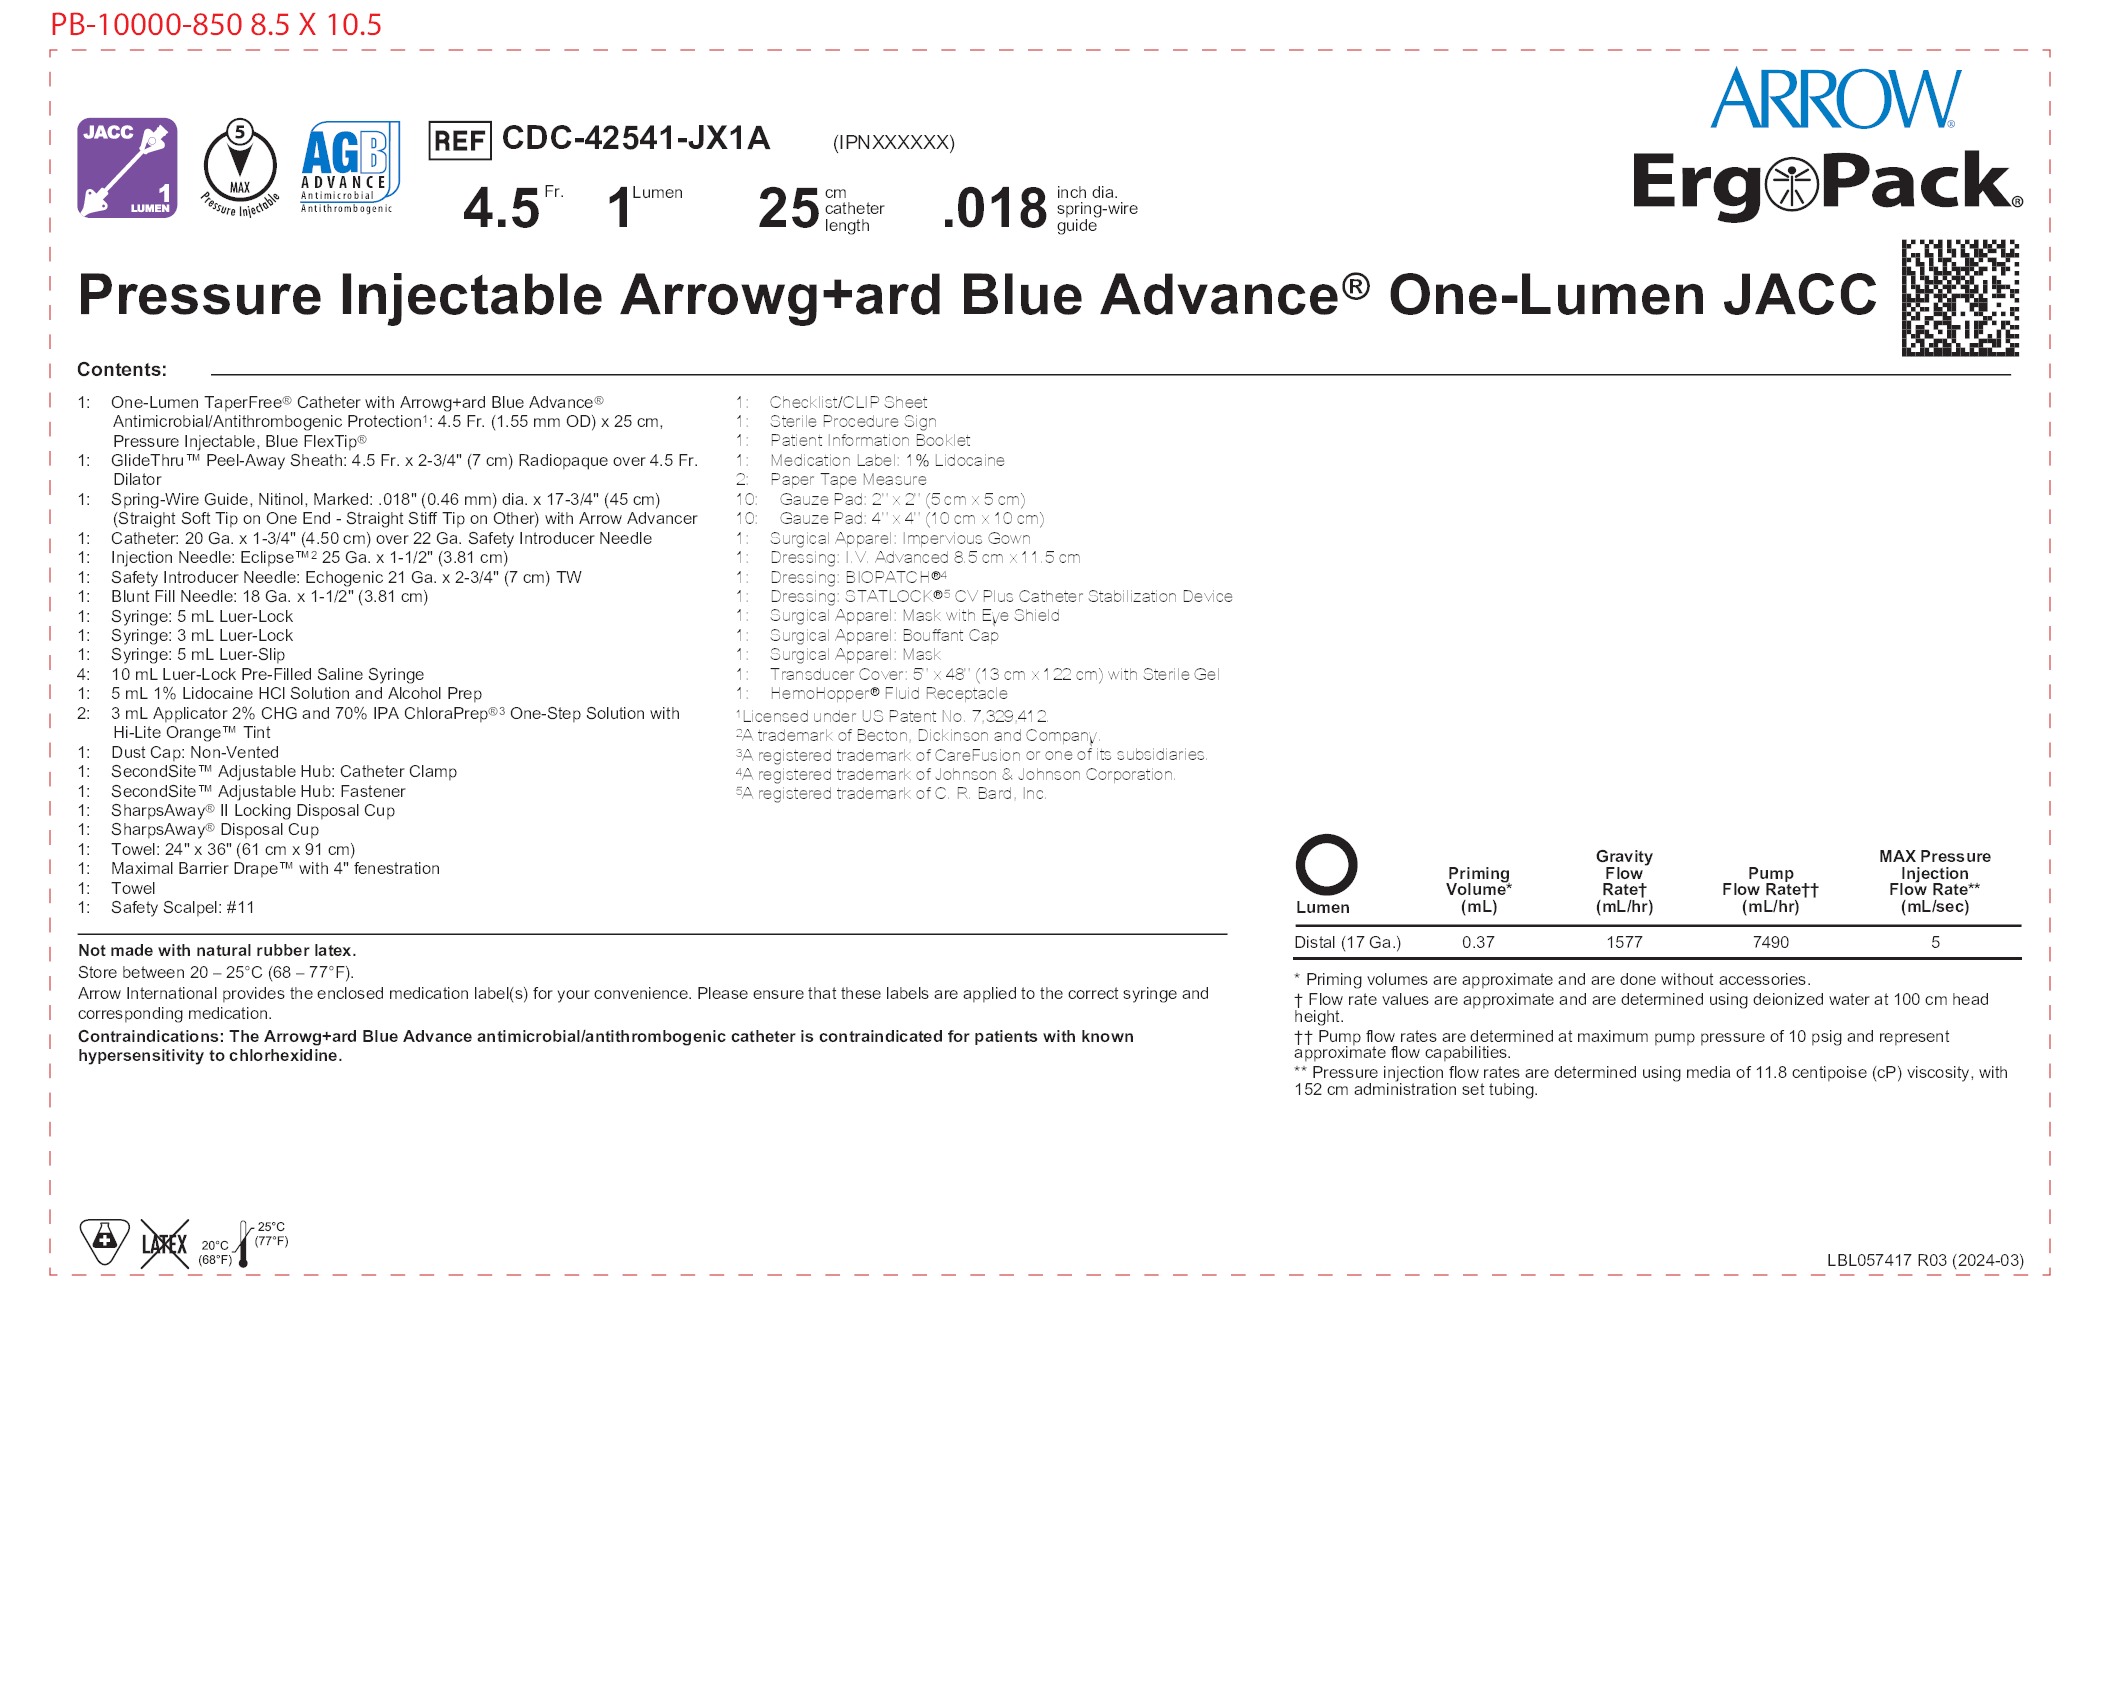 CDC-42541-JX1A - Teleflex Incorporated - Vascular Access Product